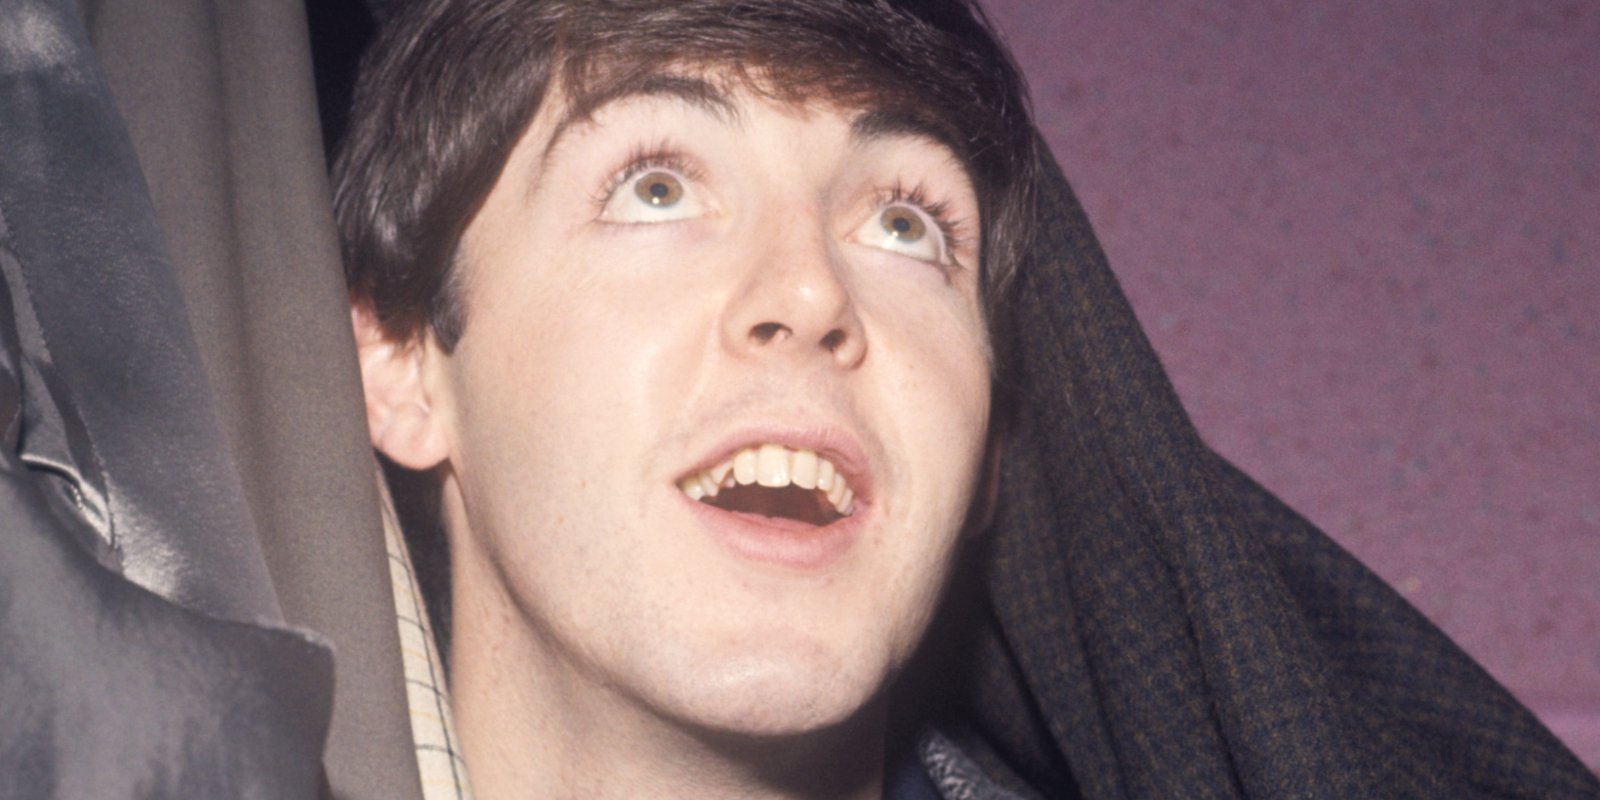 Paul McCartney looks up toward the sky, backstage in Manchester, England.